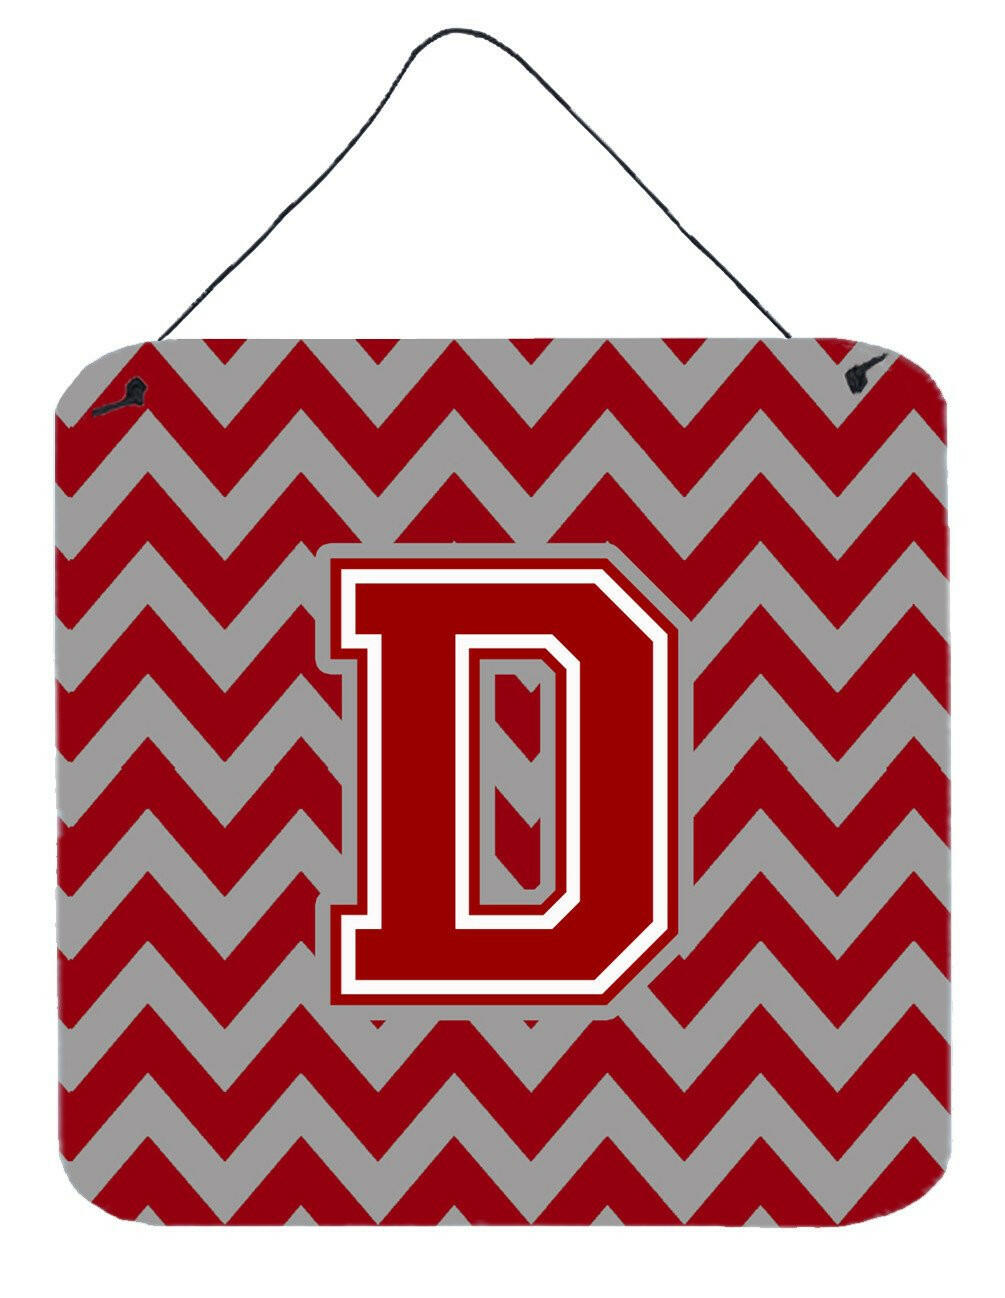 Letter D Chevron Maroon and White Wall or Door Hanging Prints CJ1049-DDS66 by Caroline's Treasures